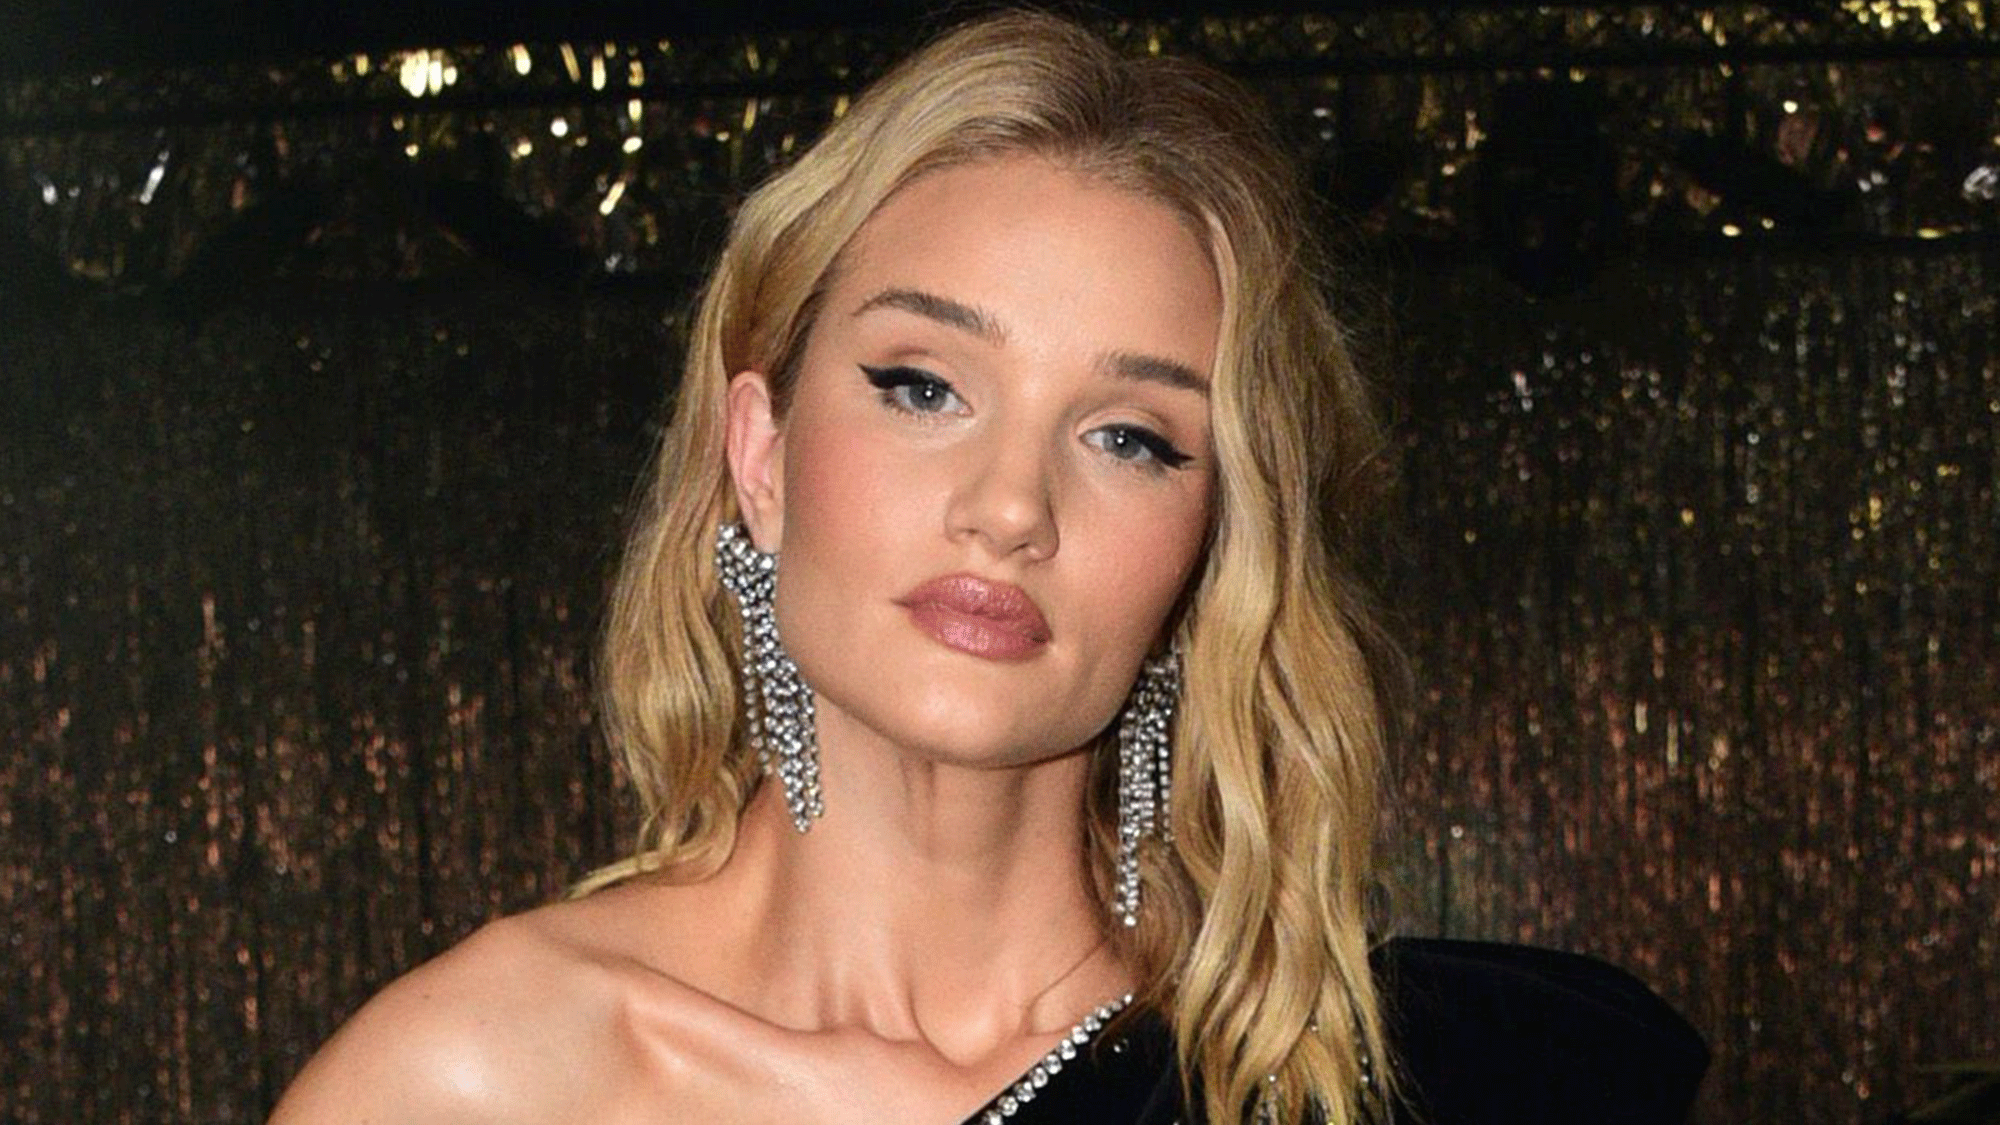 Makeup tips and tricks used by Rosie Huntington-Whiteley's MUA